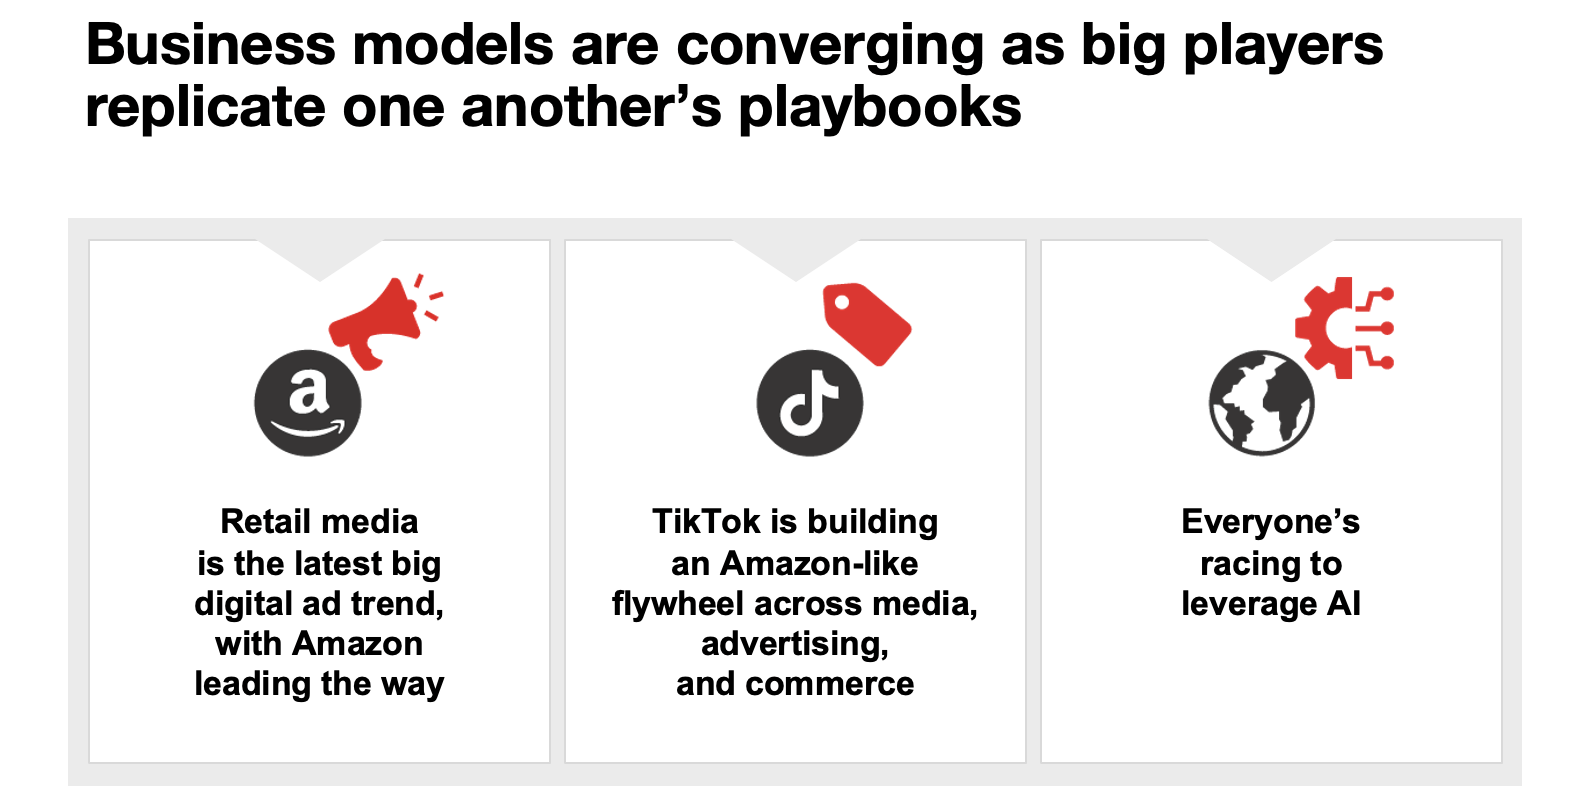 Business models are converging as big players replicate one another’s playbooks